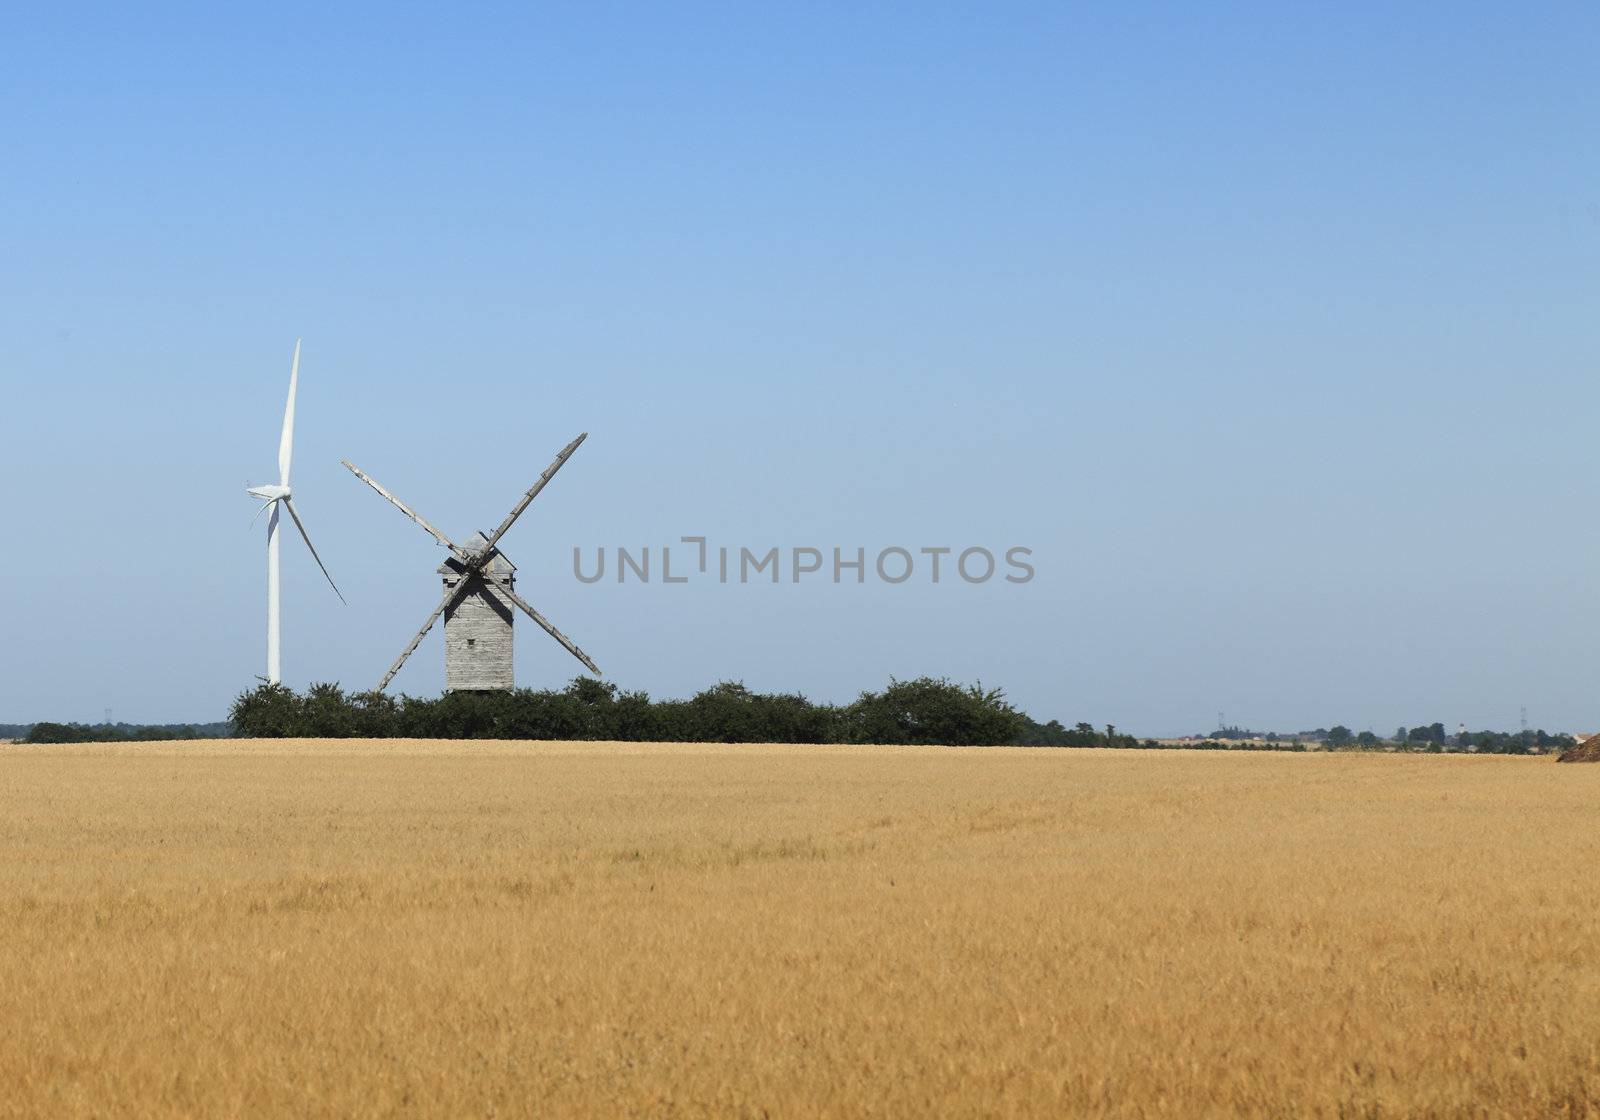 Image of a traditional windmill close to a modern eolian turbine in a cereal field.